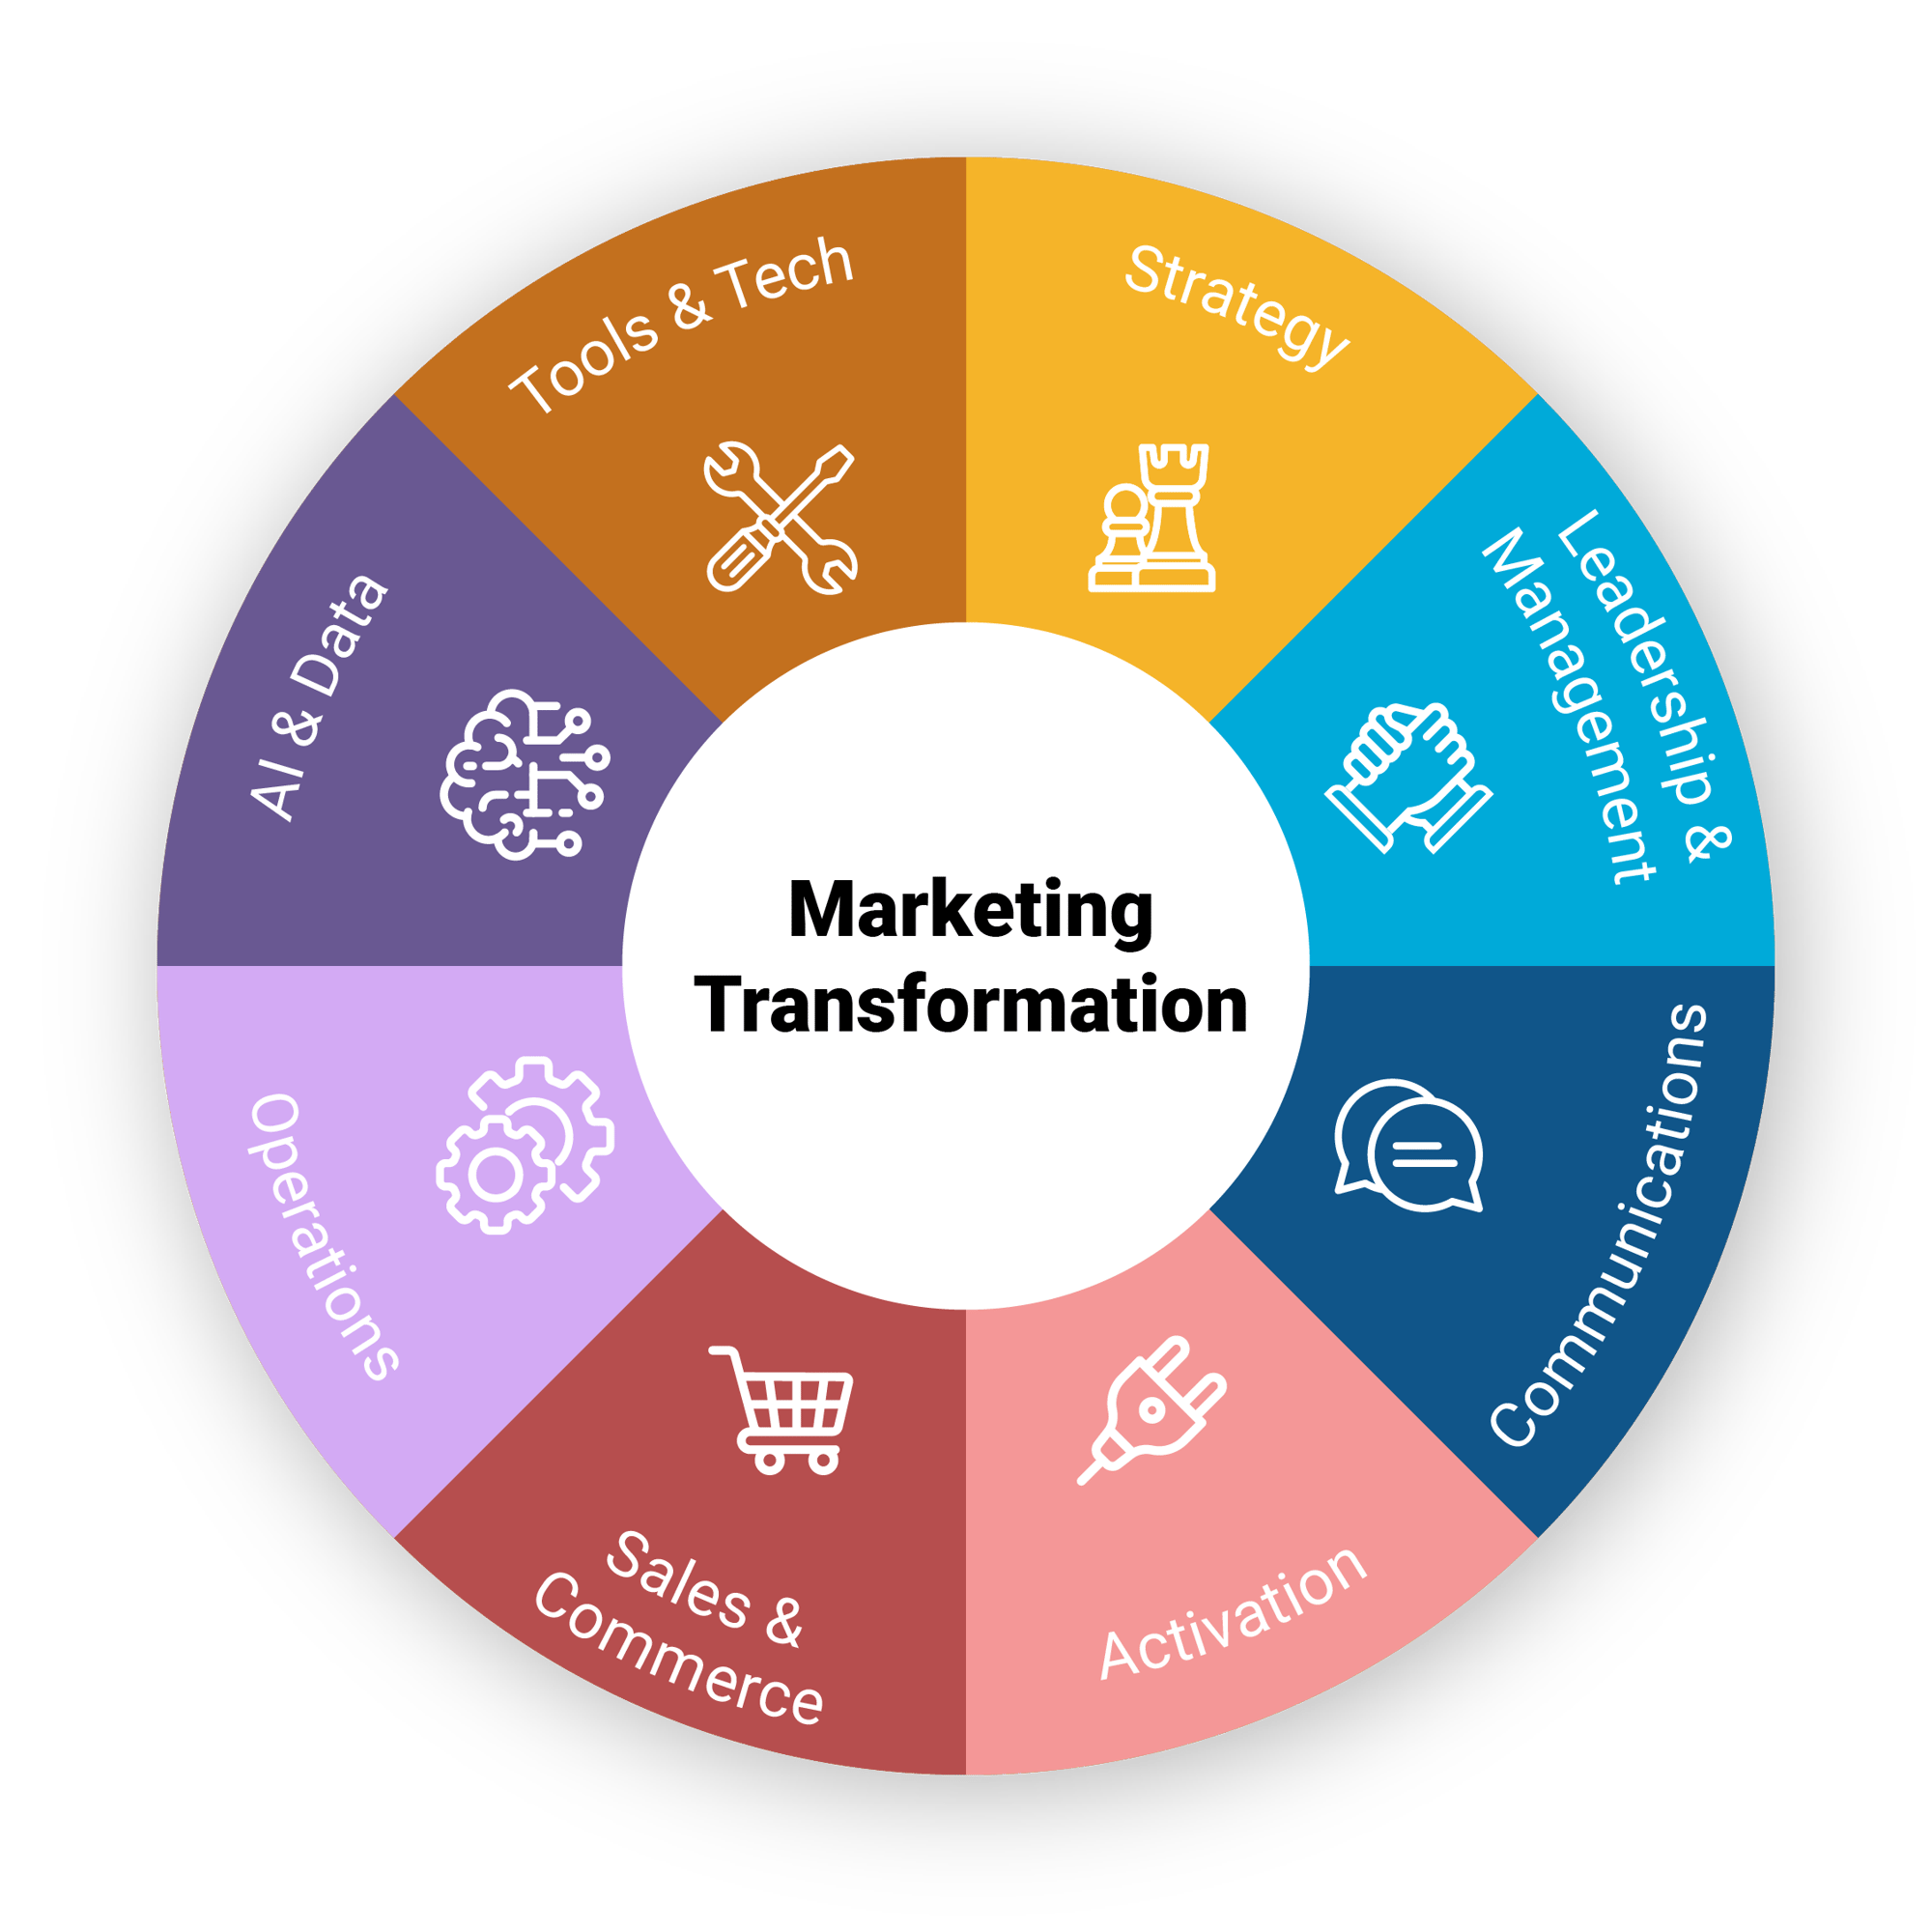 Drive Your Marketing transformation. Upgrade Your Marketing Capabilities